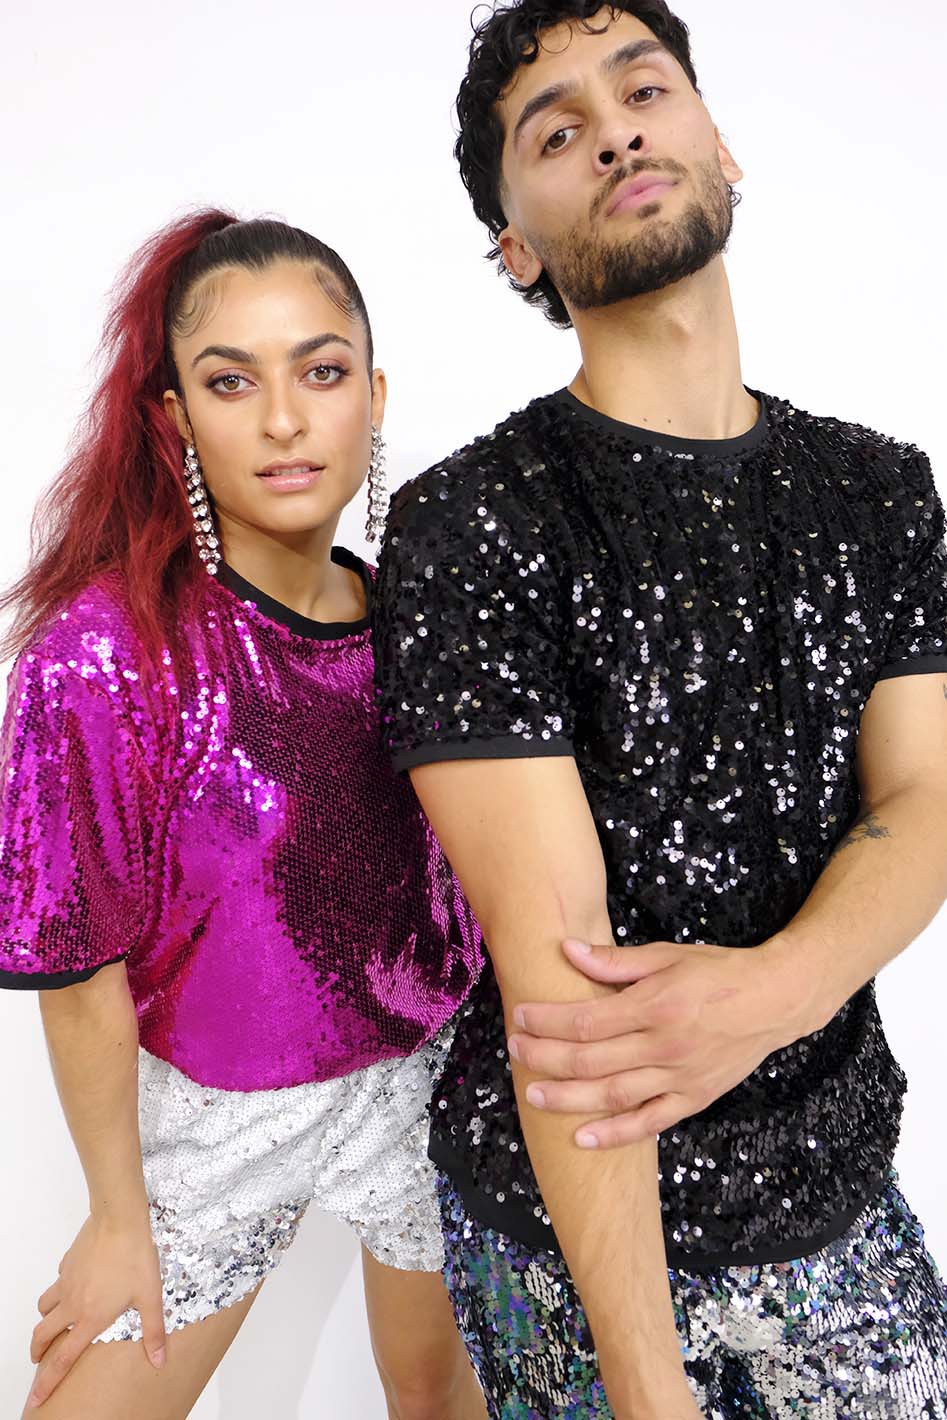 man wearing black sequin t-shirt and purple blue sequin shorts as part of a rave outfit for men. Woman wearing pink sequin t-shirt and white silver sequin shorts as part of a festival outfit for women